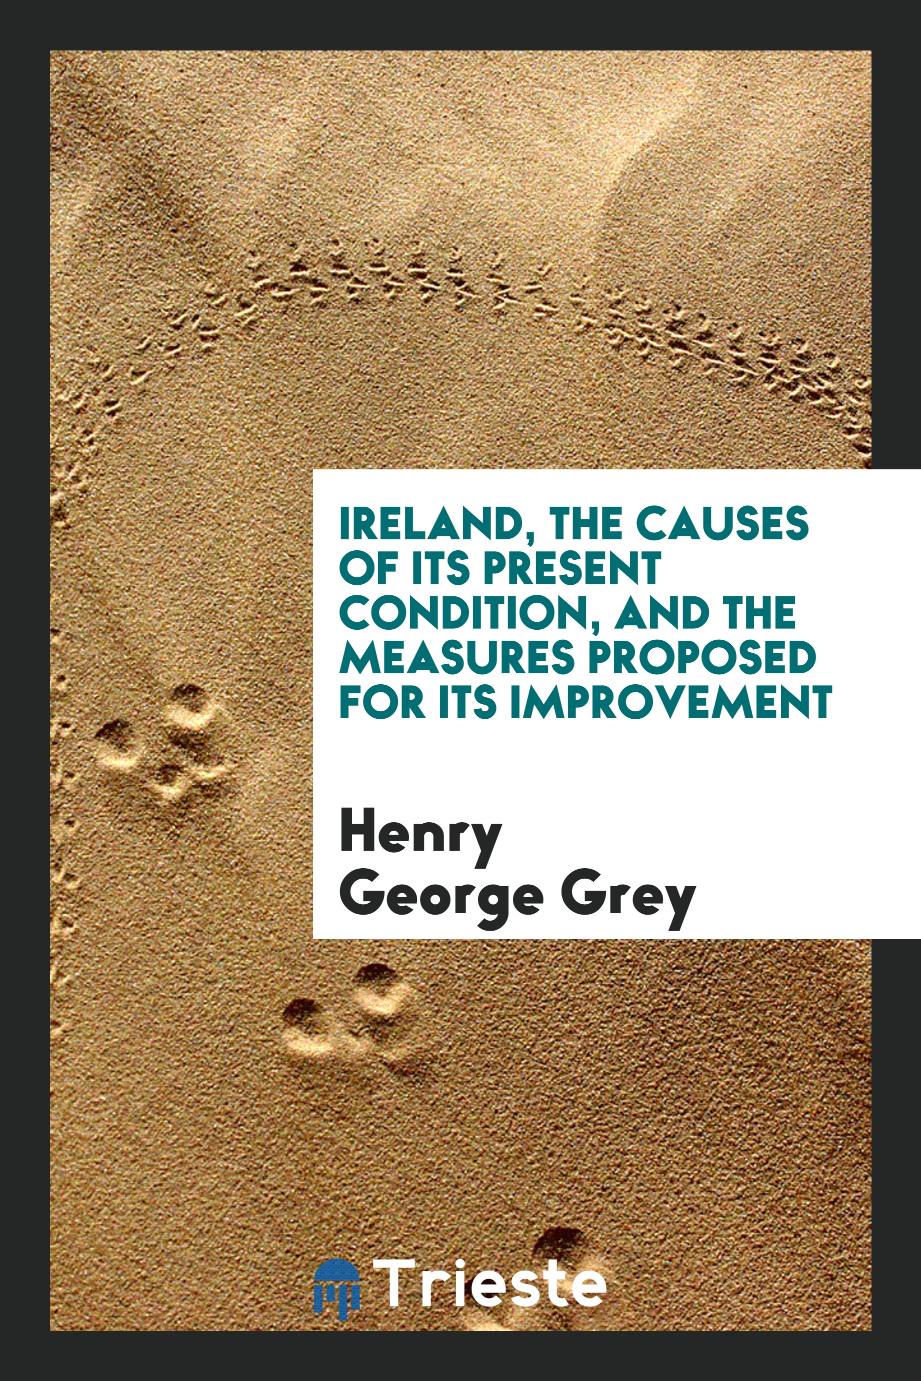 Ireland, the causes of its present condition, and the measures proposed for its improvement